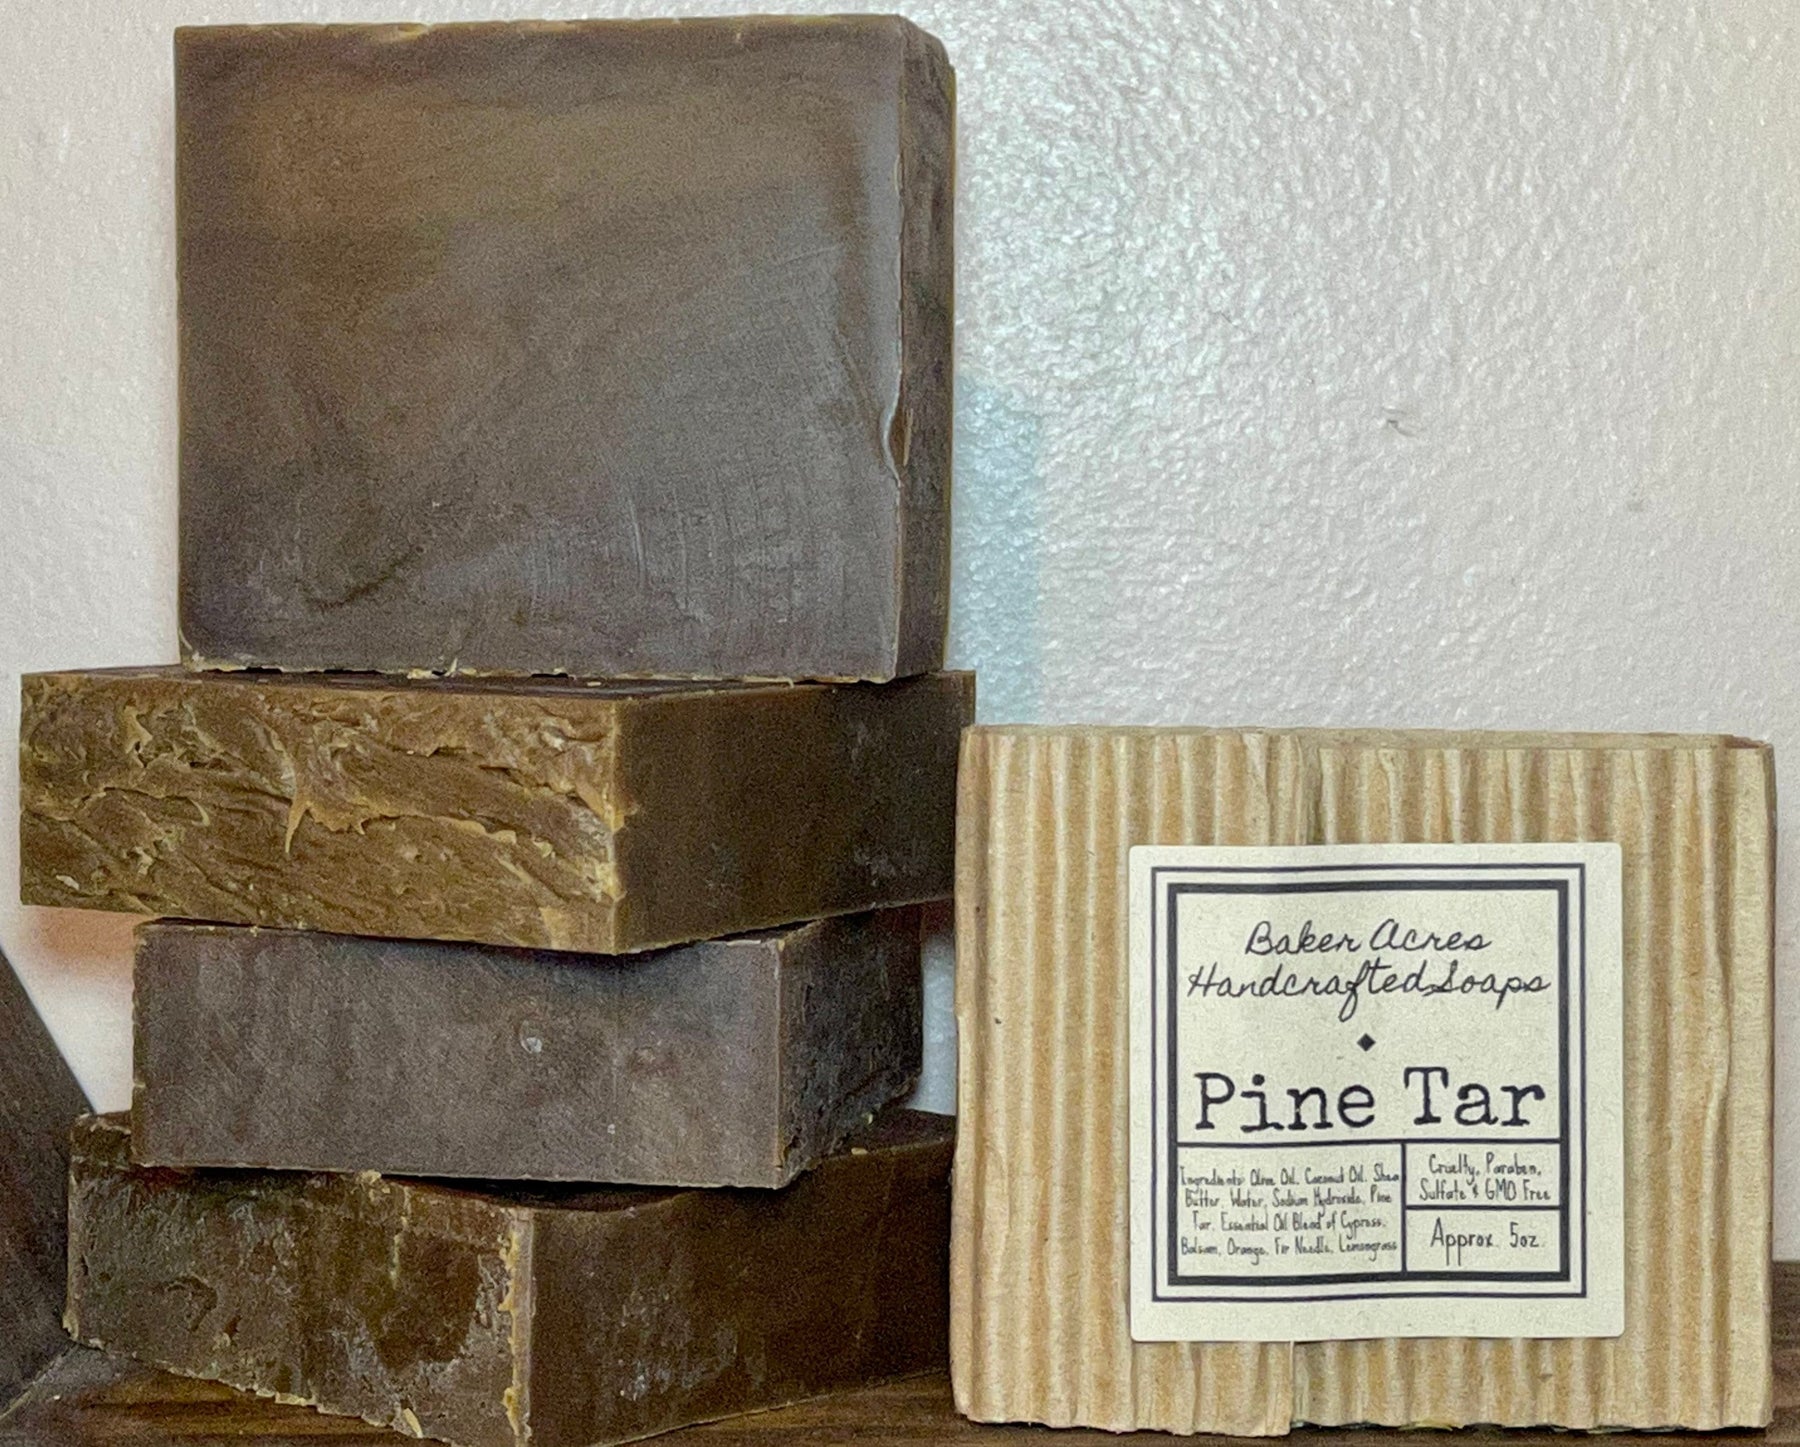 Son's of Timber Cypress Balsam & Pine Tar Soap (4 Pack) –